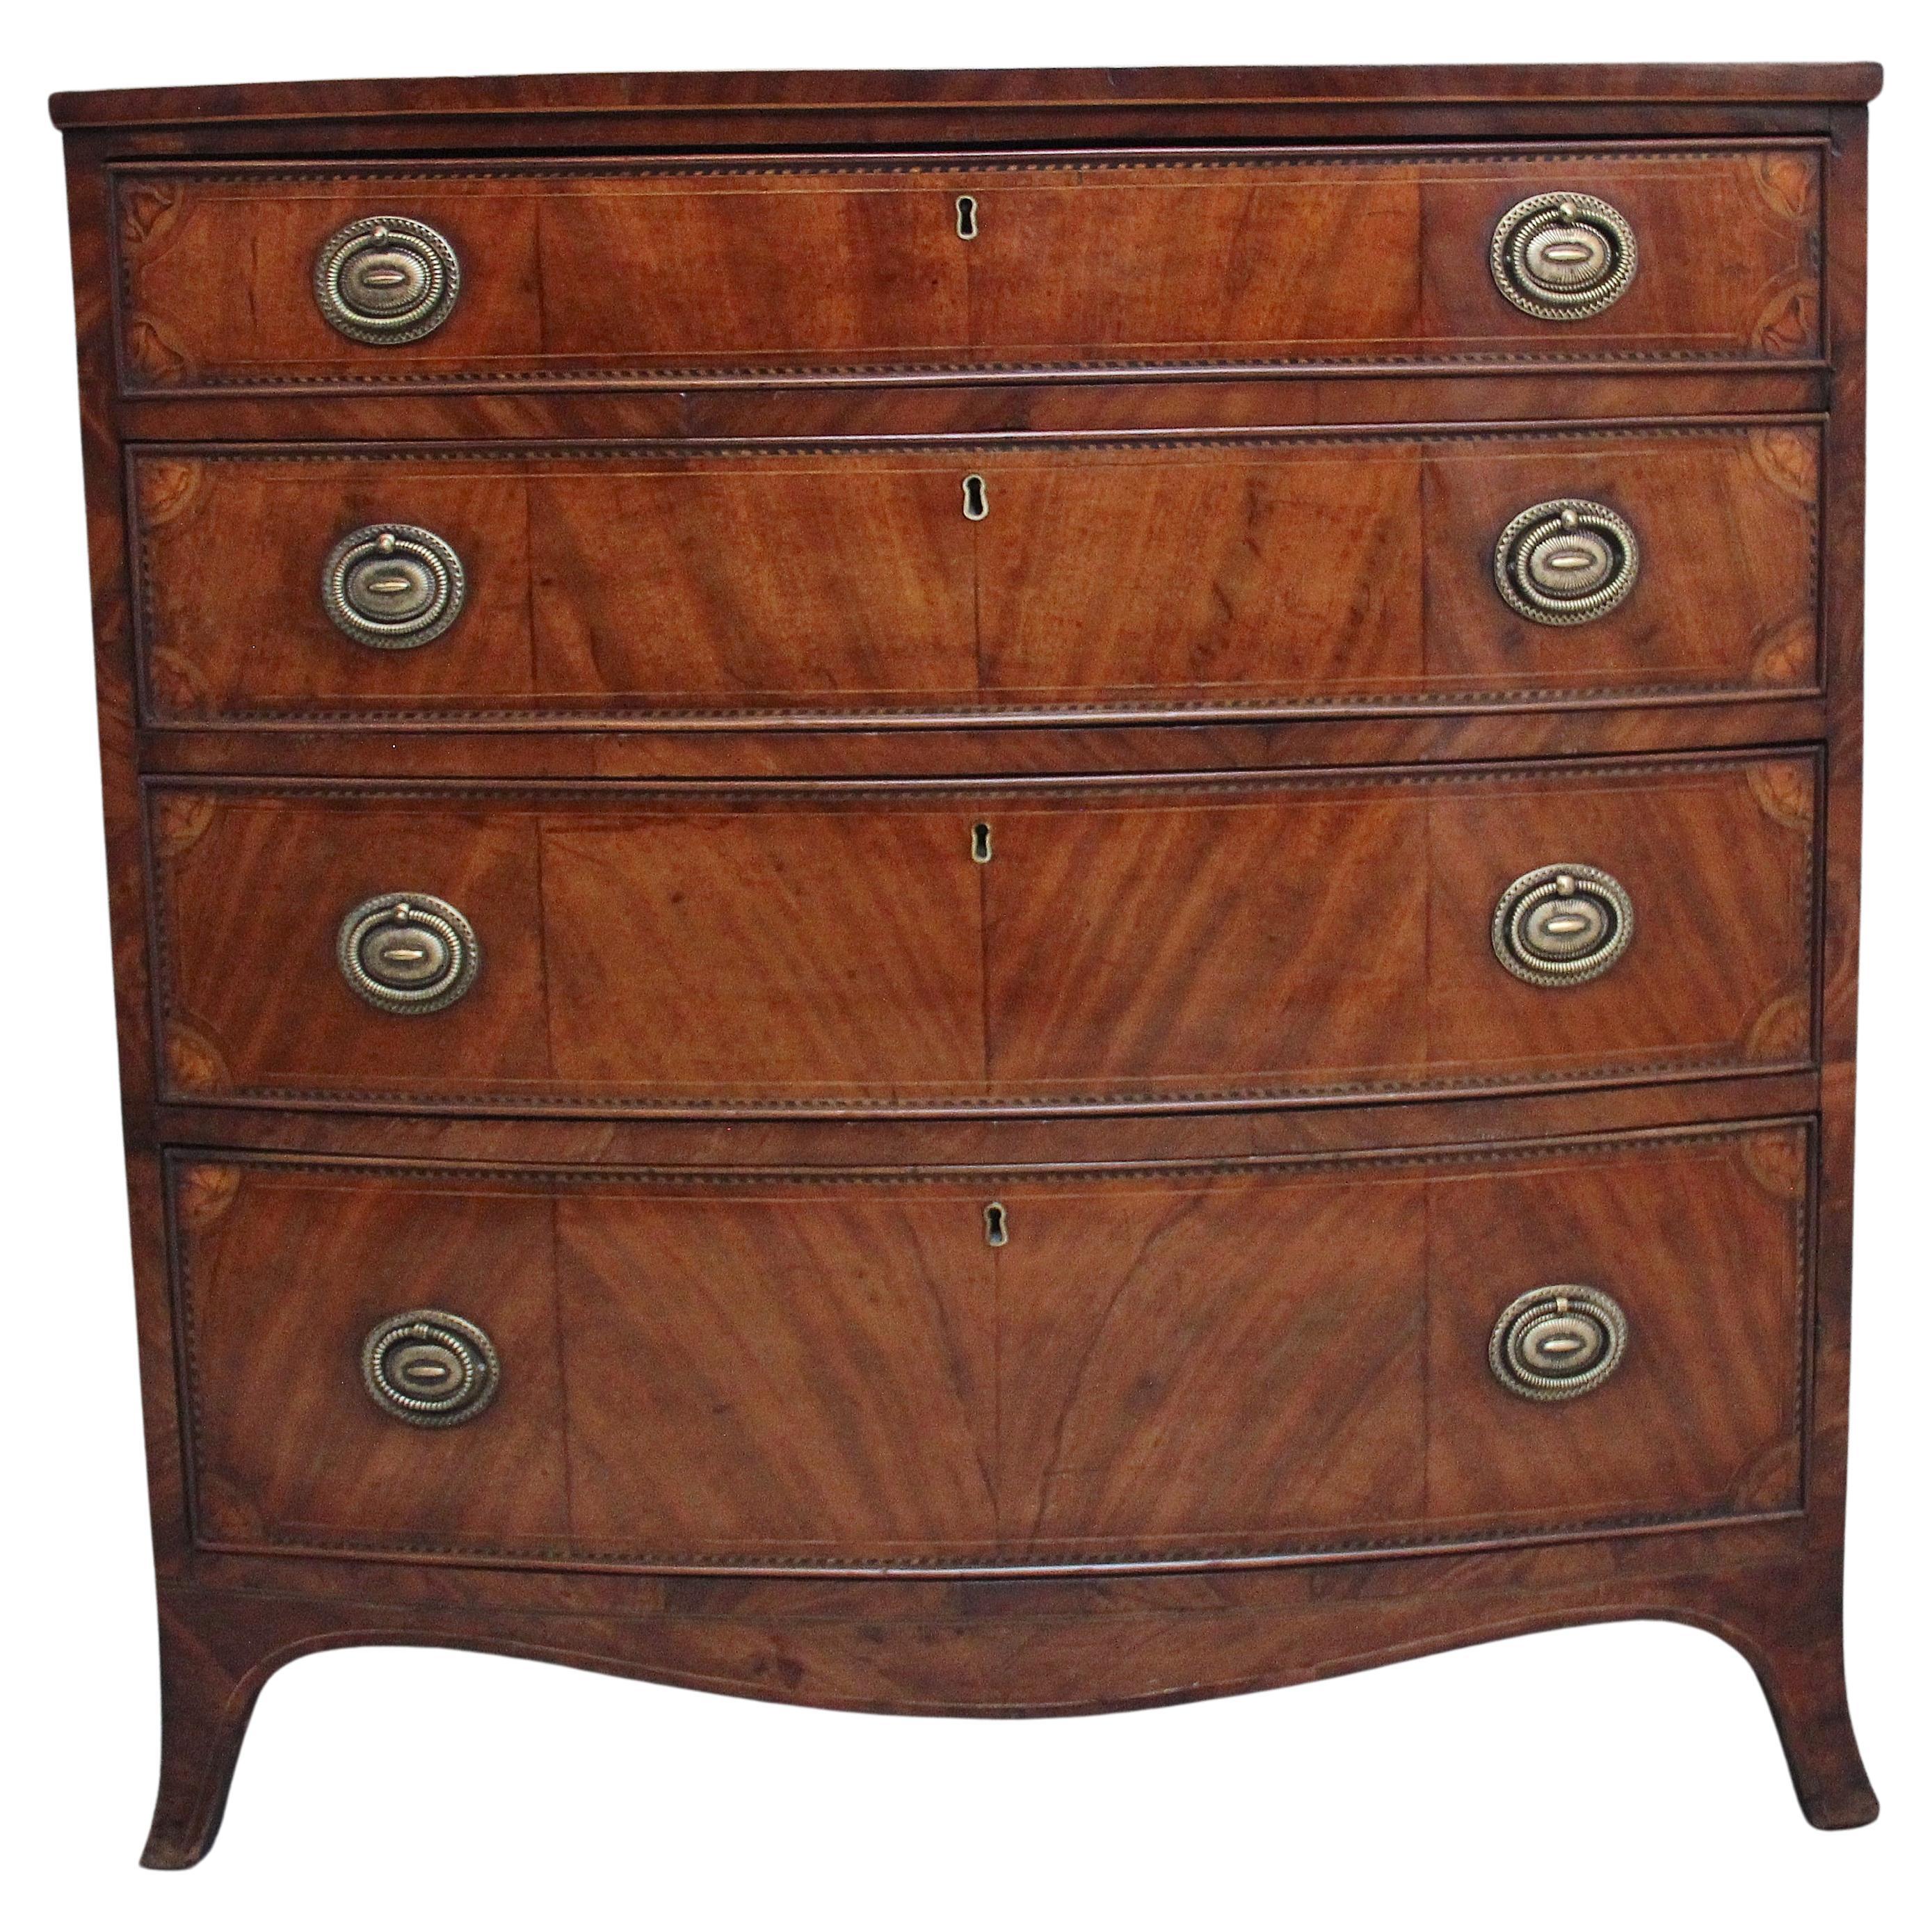 1790s Case Pieces and Storage Cabinets